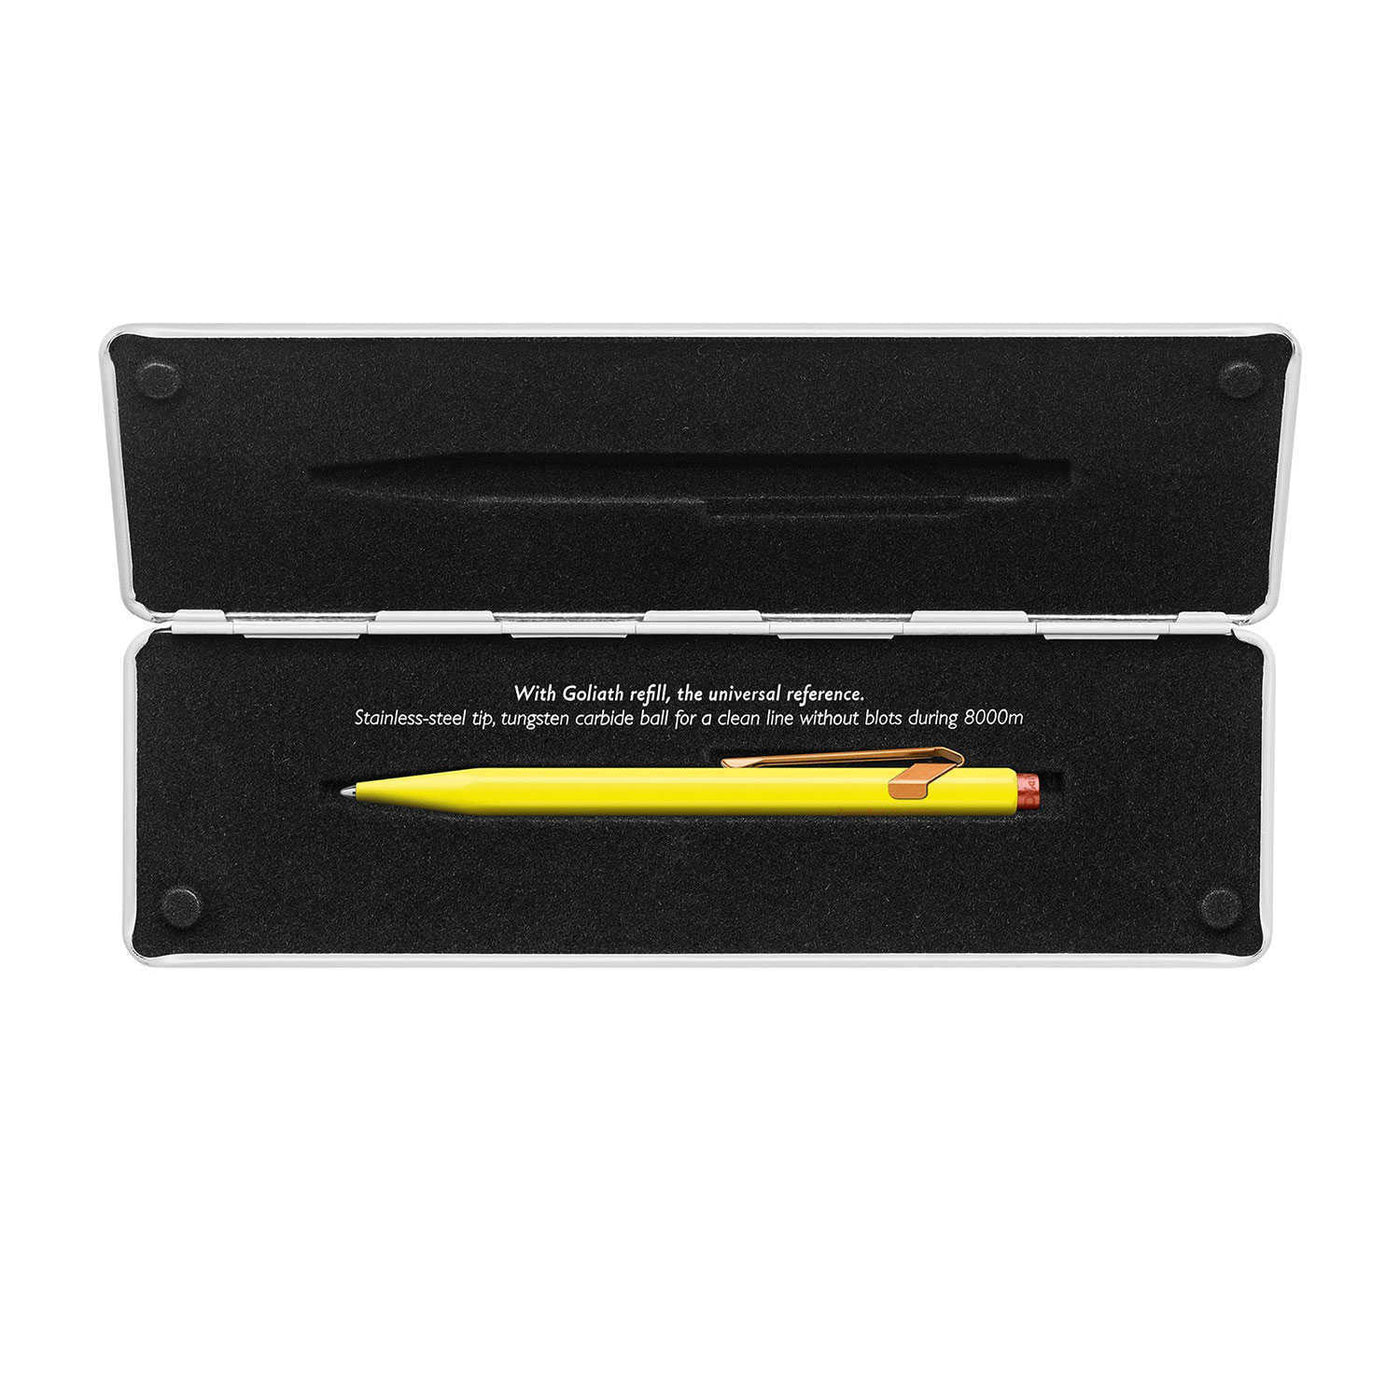 Caran d'Ache 849 Claim Your Style Ball Pen - Canary Yellow (Limited Edition) 4